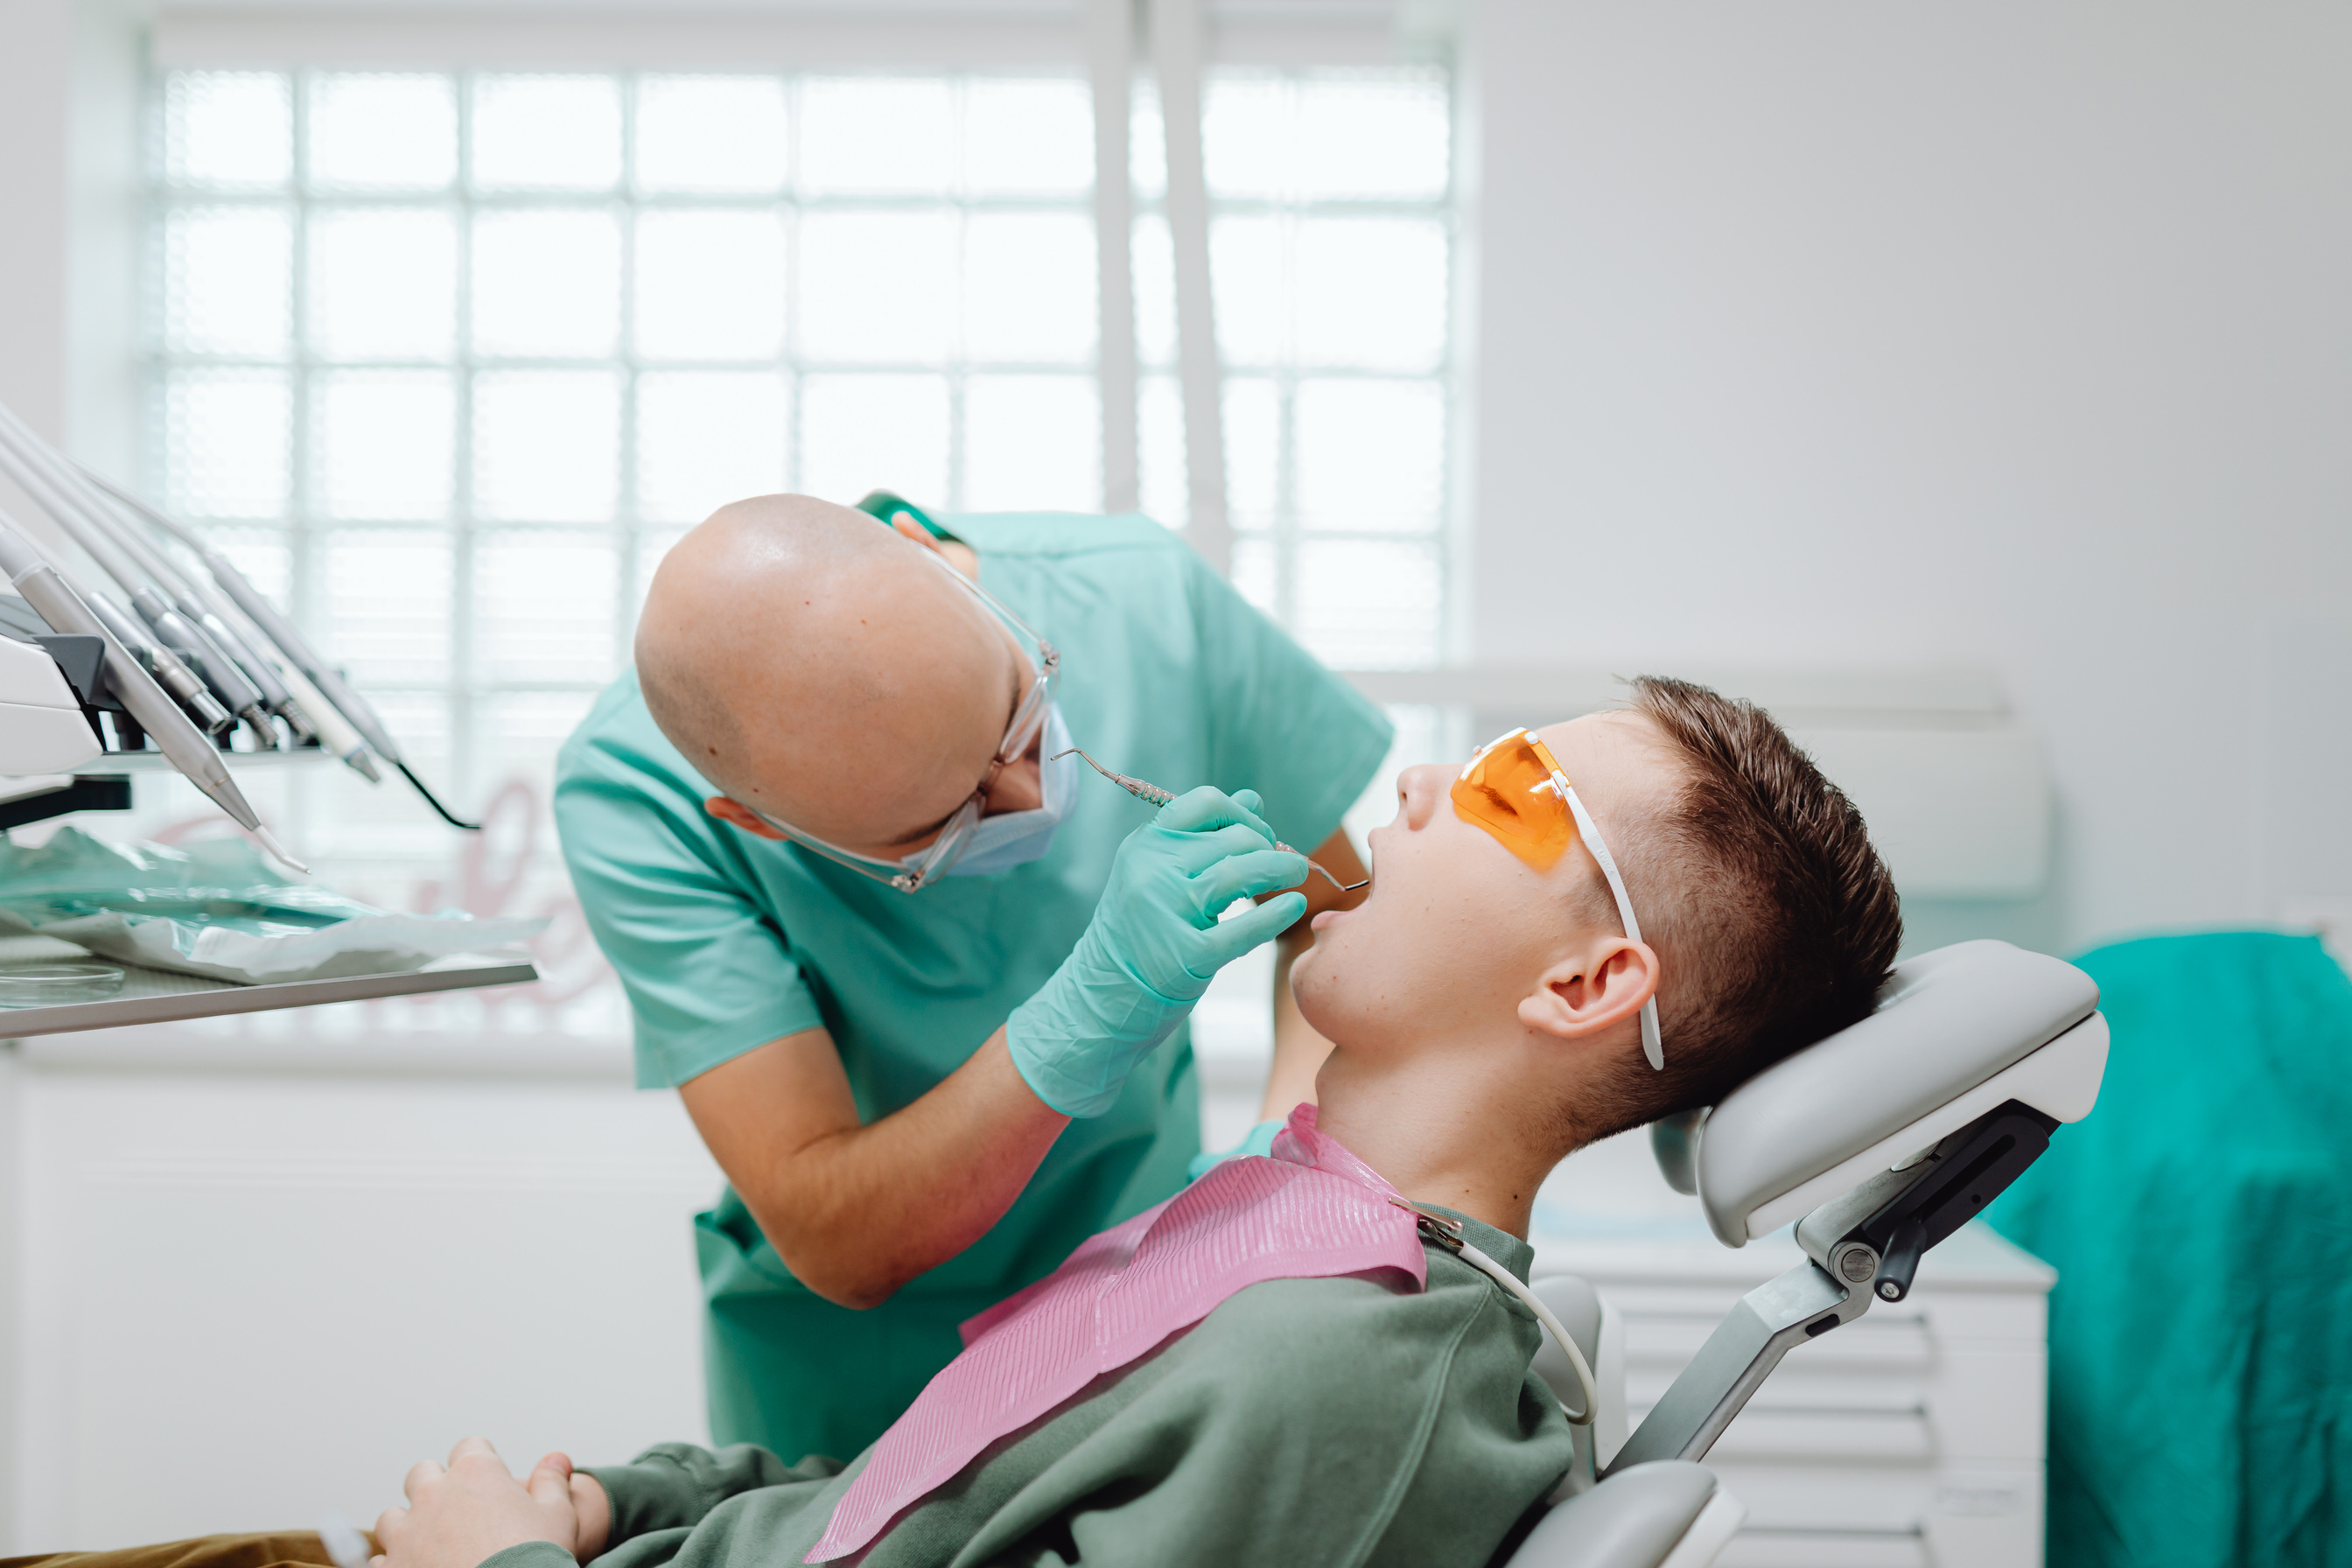 A Dentist Checking a Patient's Teeth